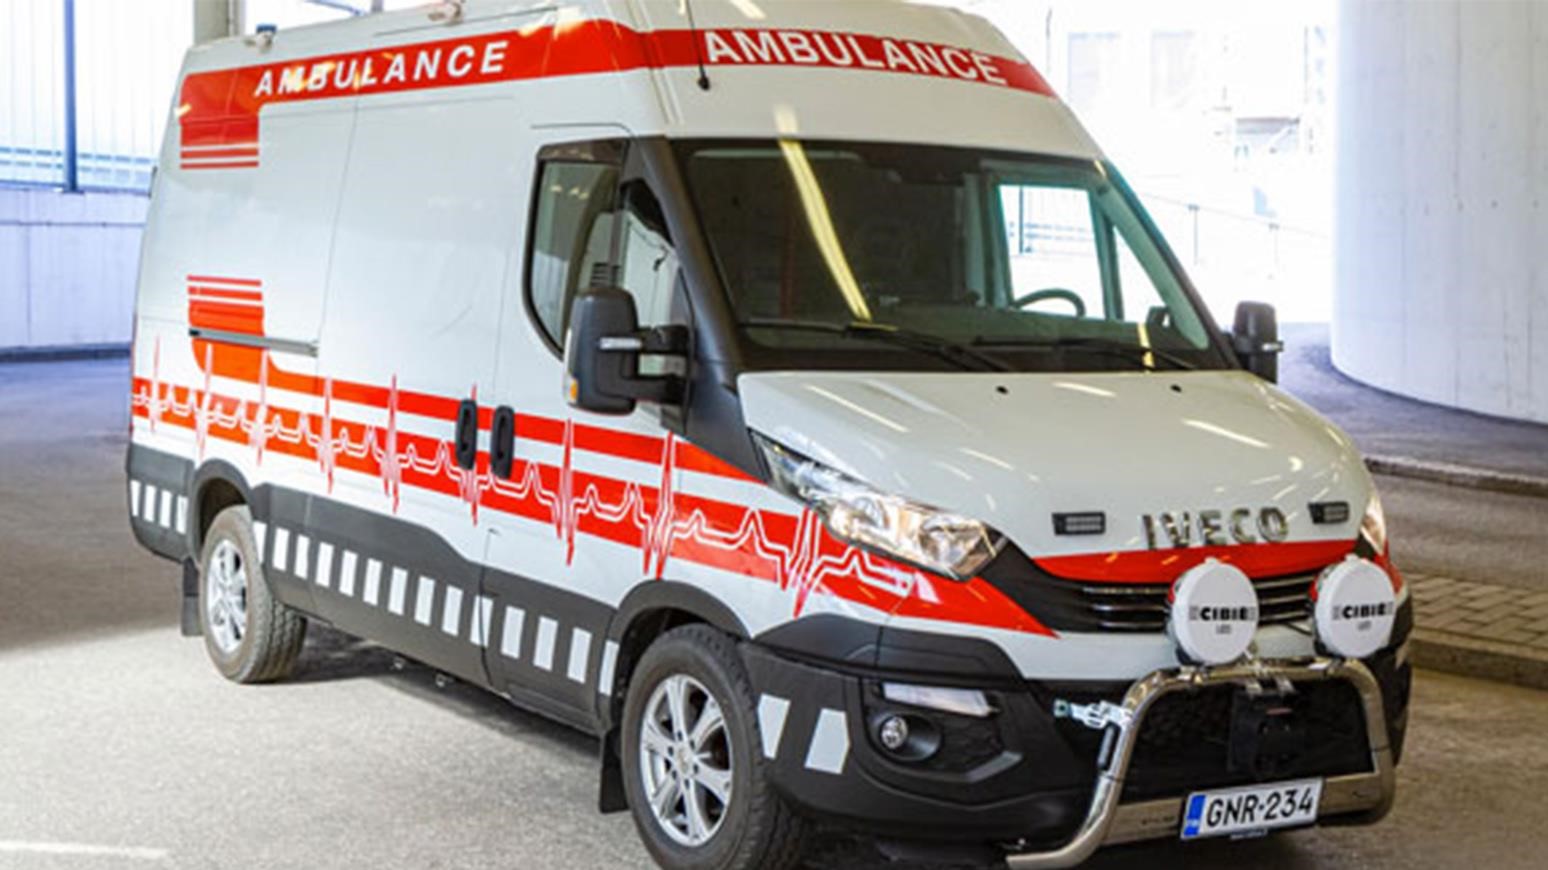 IVECO Helping Communities Across Europe Get Through The COVID-19 Pandemic